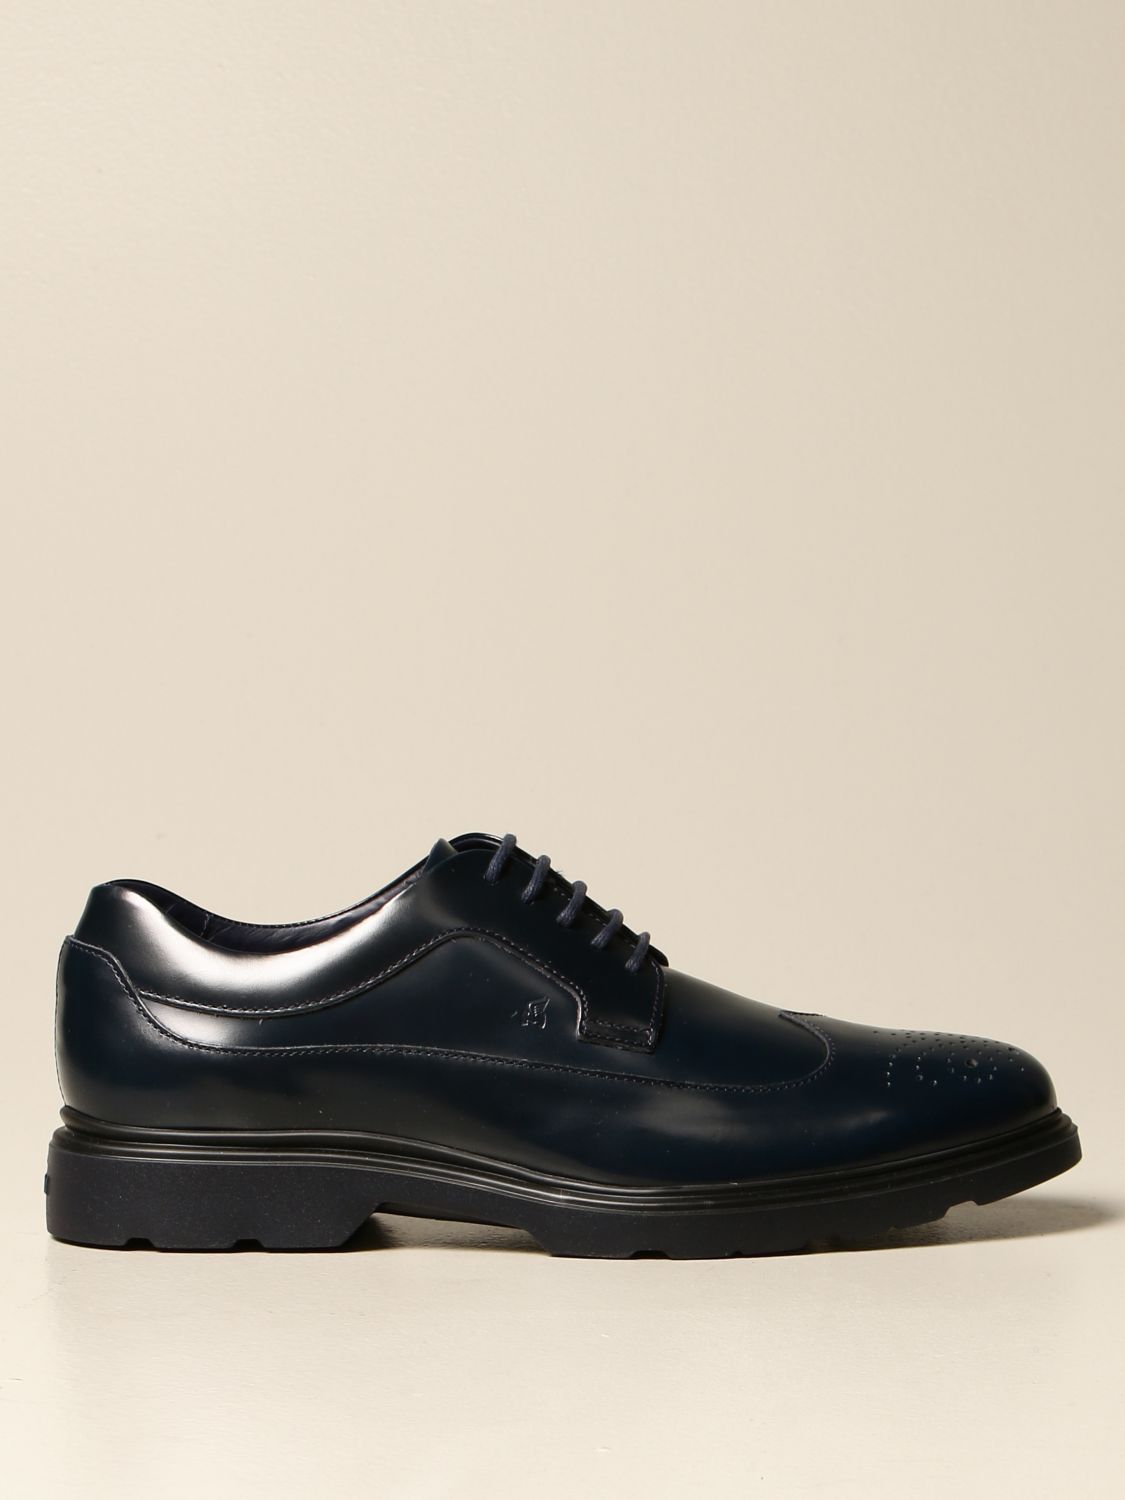 Hogan Outlet: H393 in brushed leather | Brogue Shoes Men Navy | Brogue Shoes HXM3930BH70 7J7 GIGLIO.COM